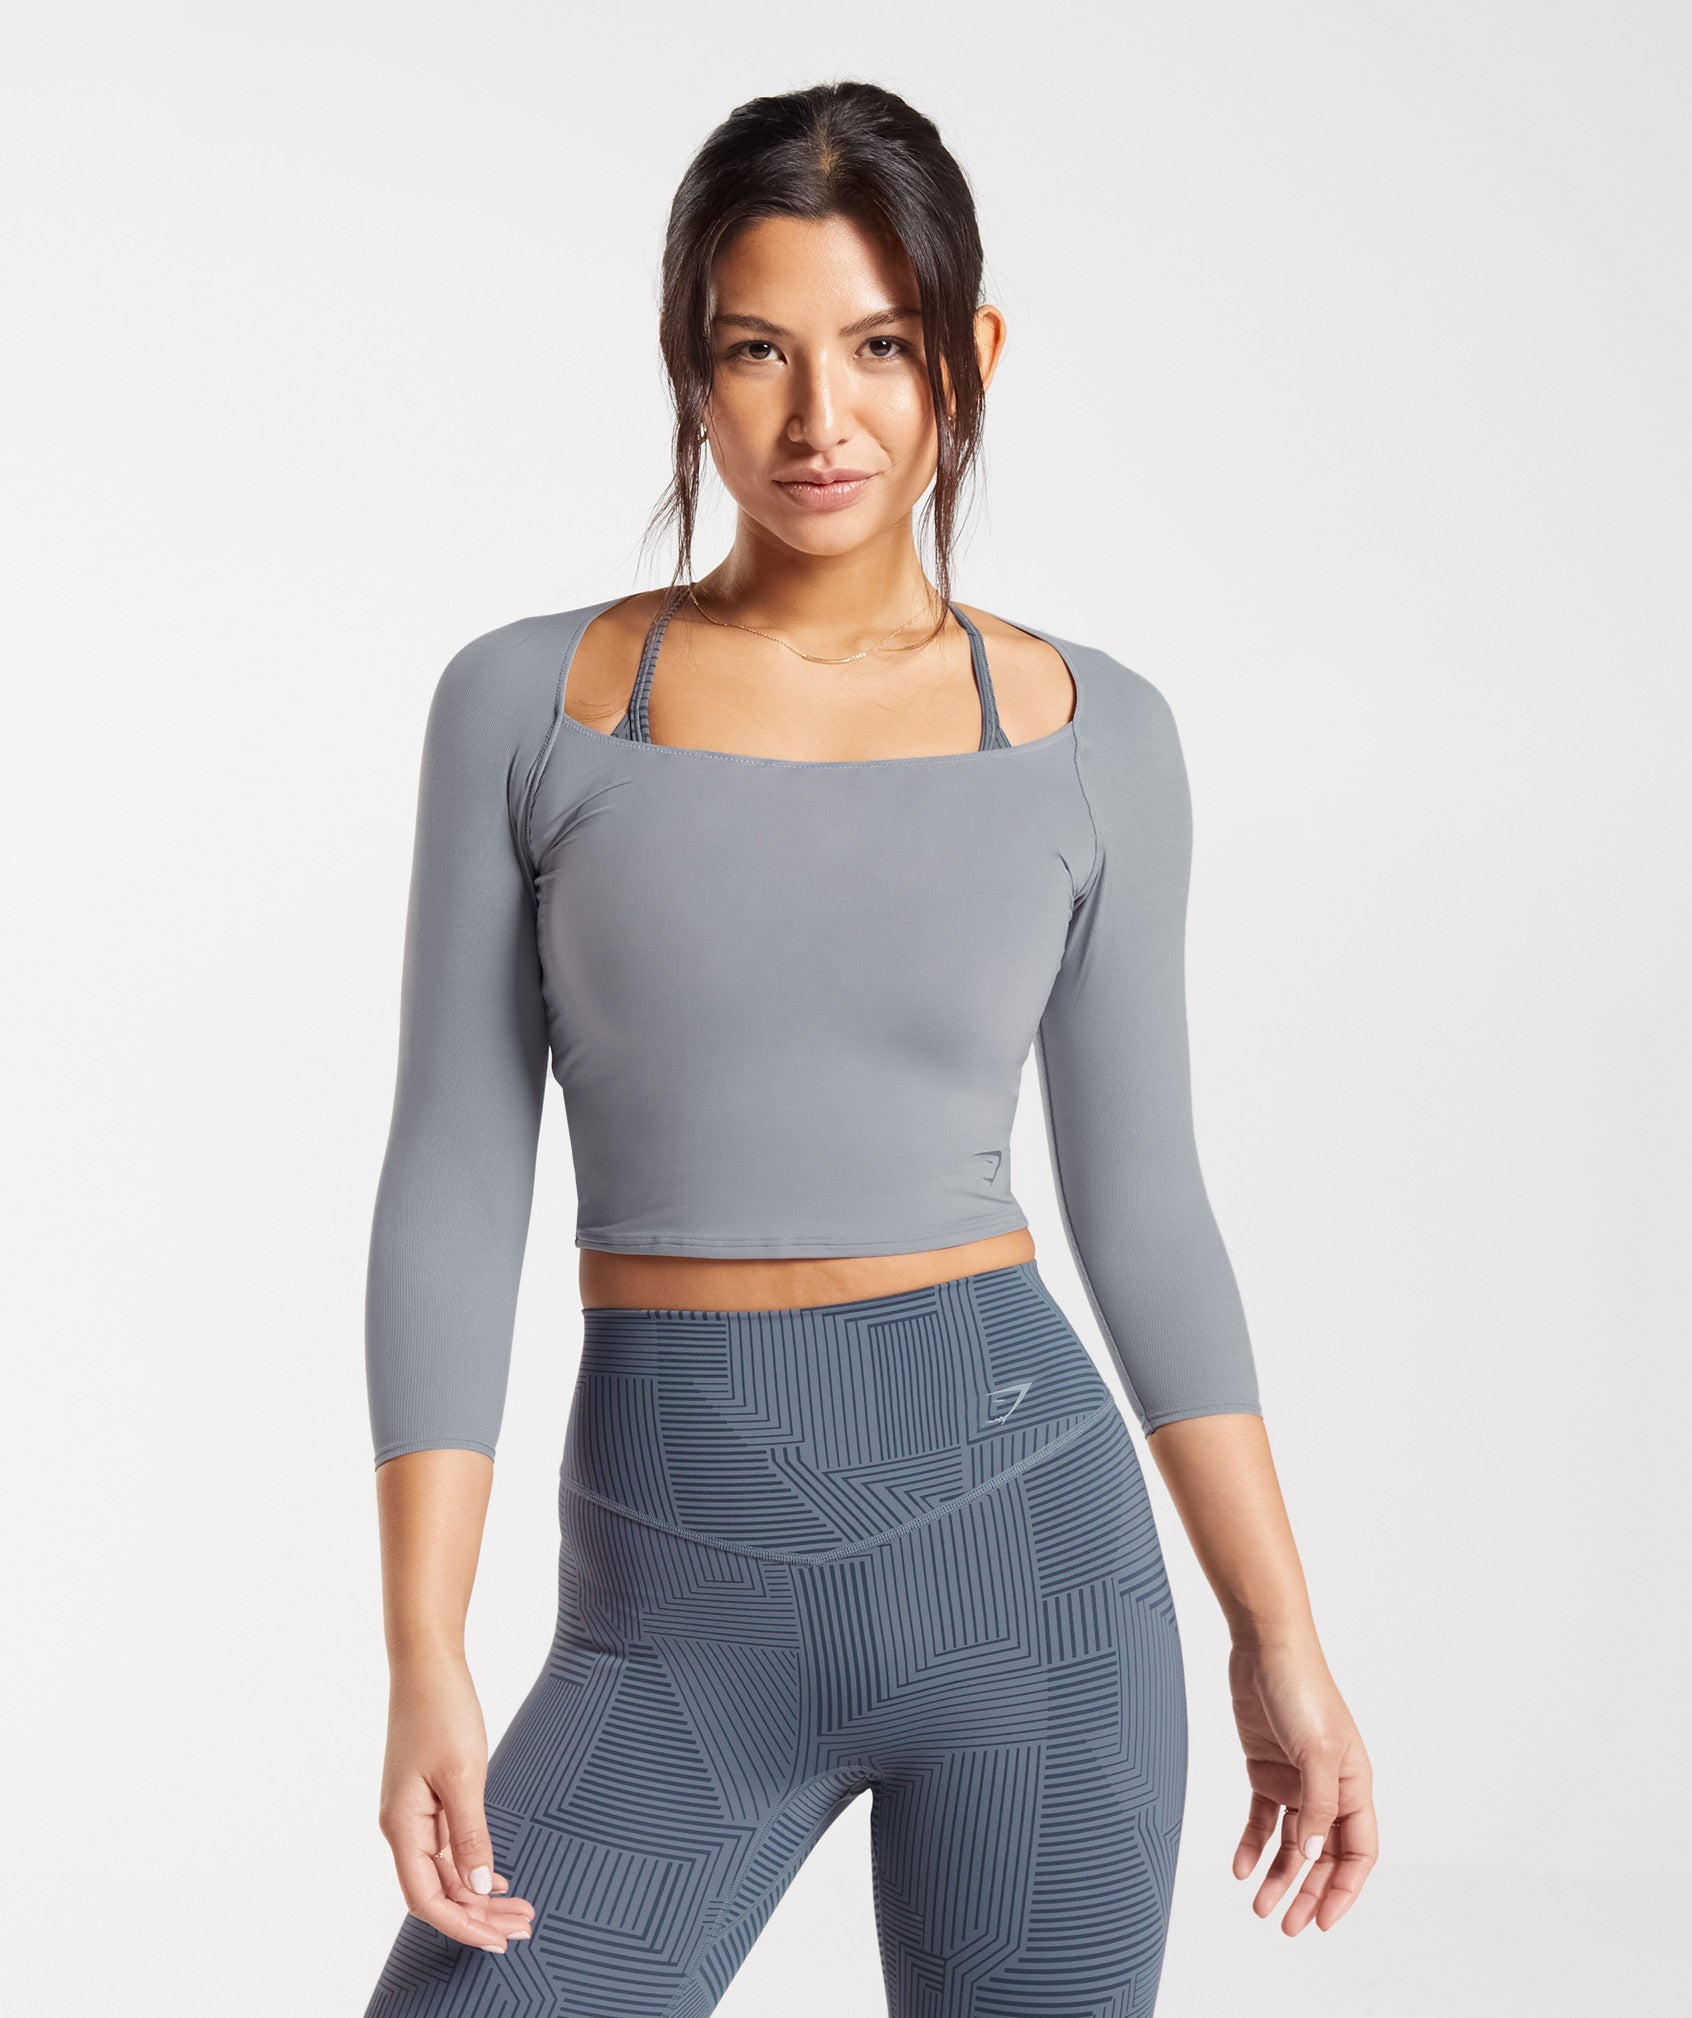 http://cdn.shopify.com/s/files/1/0098/8822/products/Elevate44654SleeveCropTopDriftGreyB4A7Z-GBYF22.jpg?v=1677494606